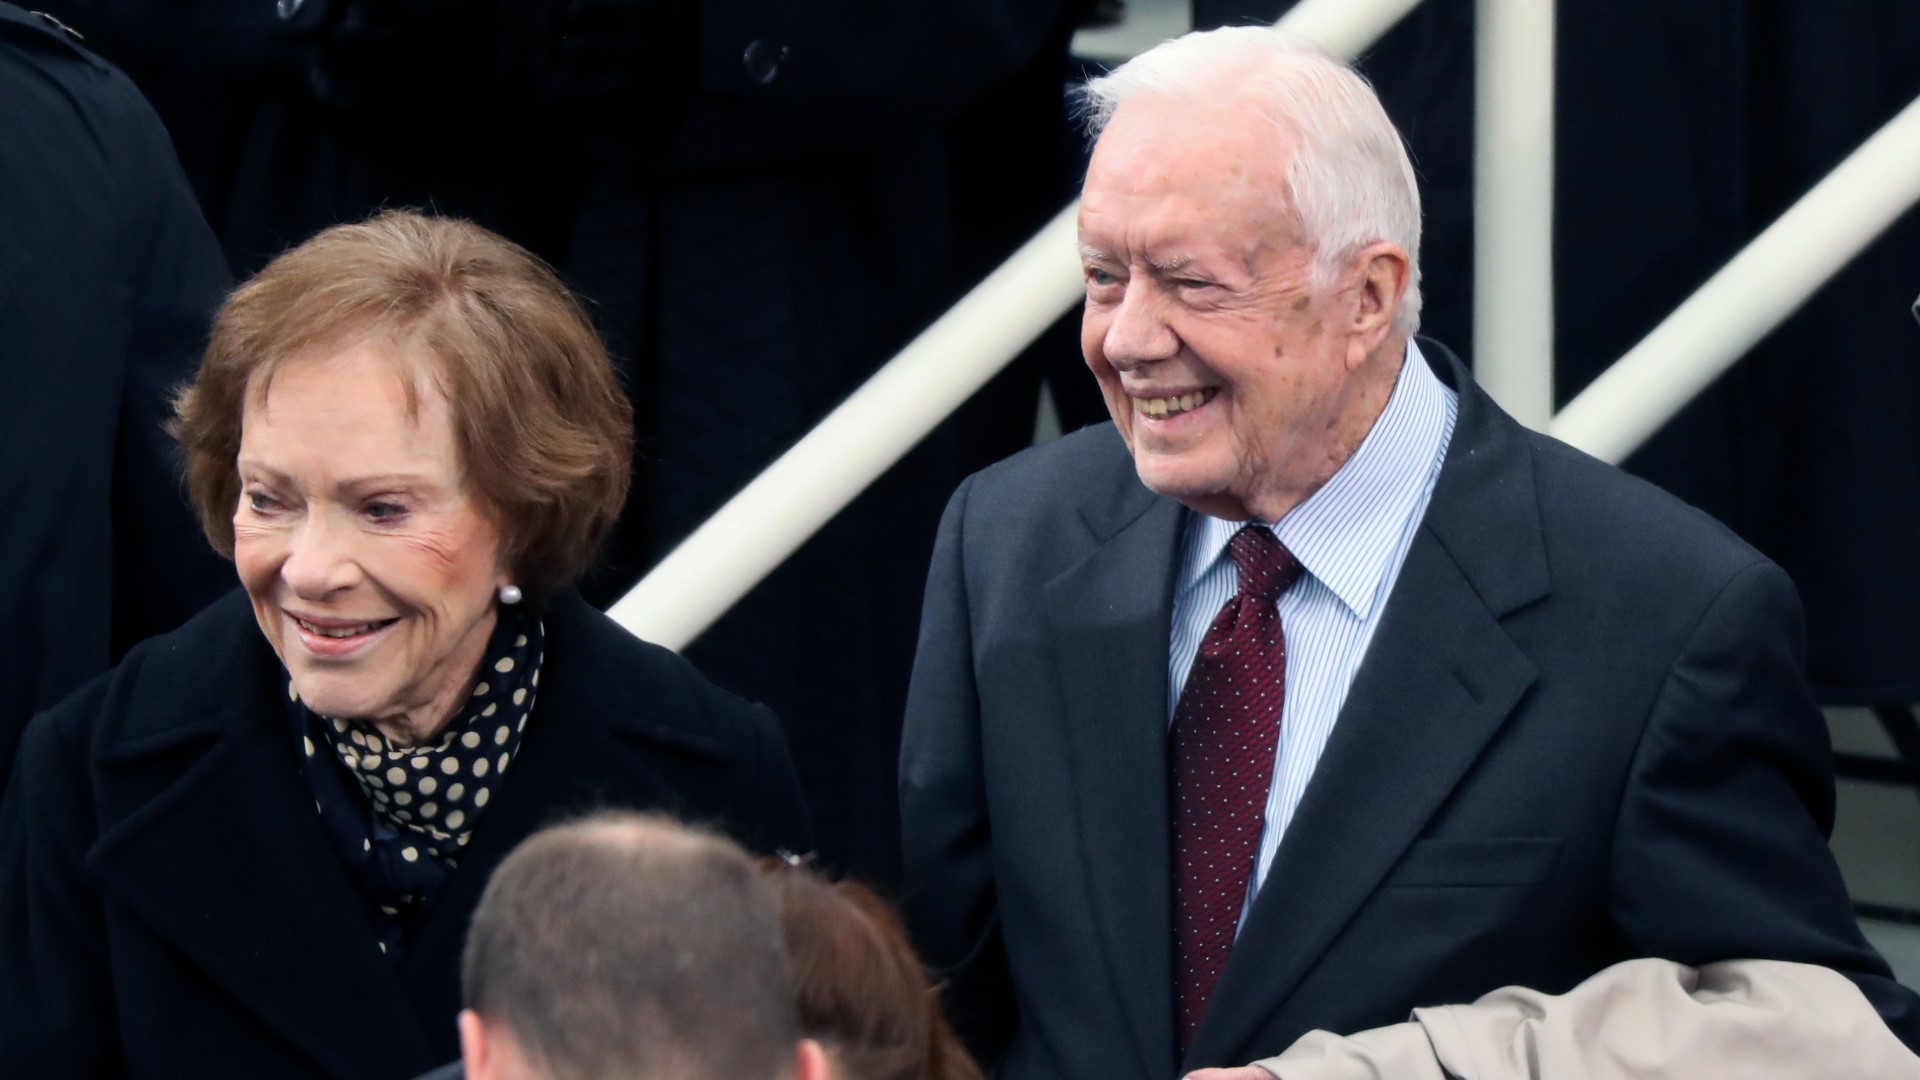 Former U.S. President and Georgia native Jimmy Carter is entering hospice care at his home in Plains, Ga., instead of receiving "additional" medical intervention